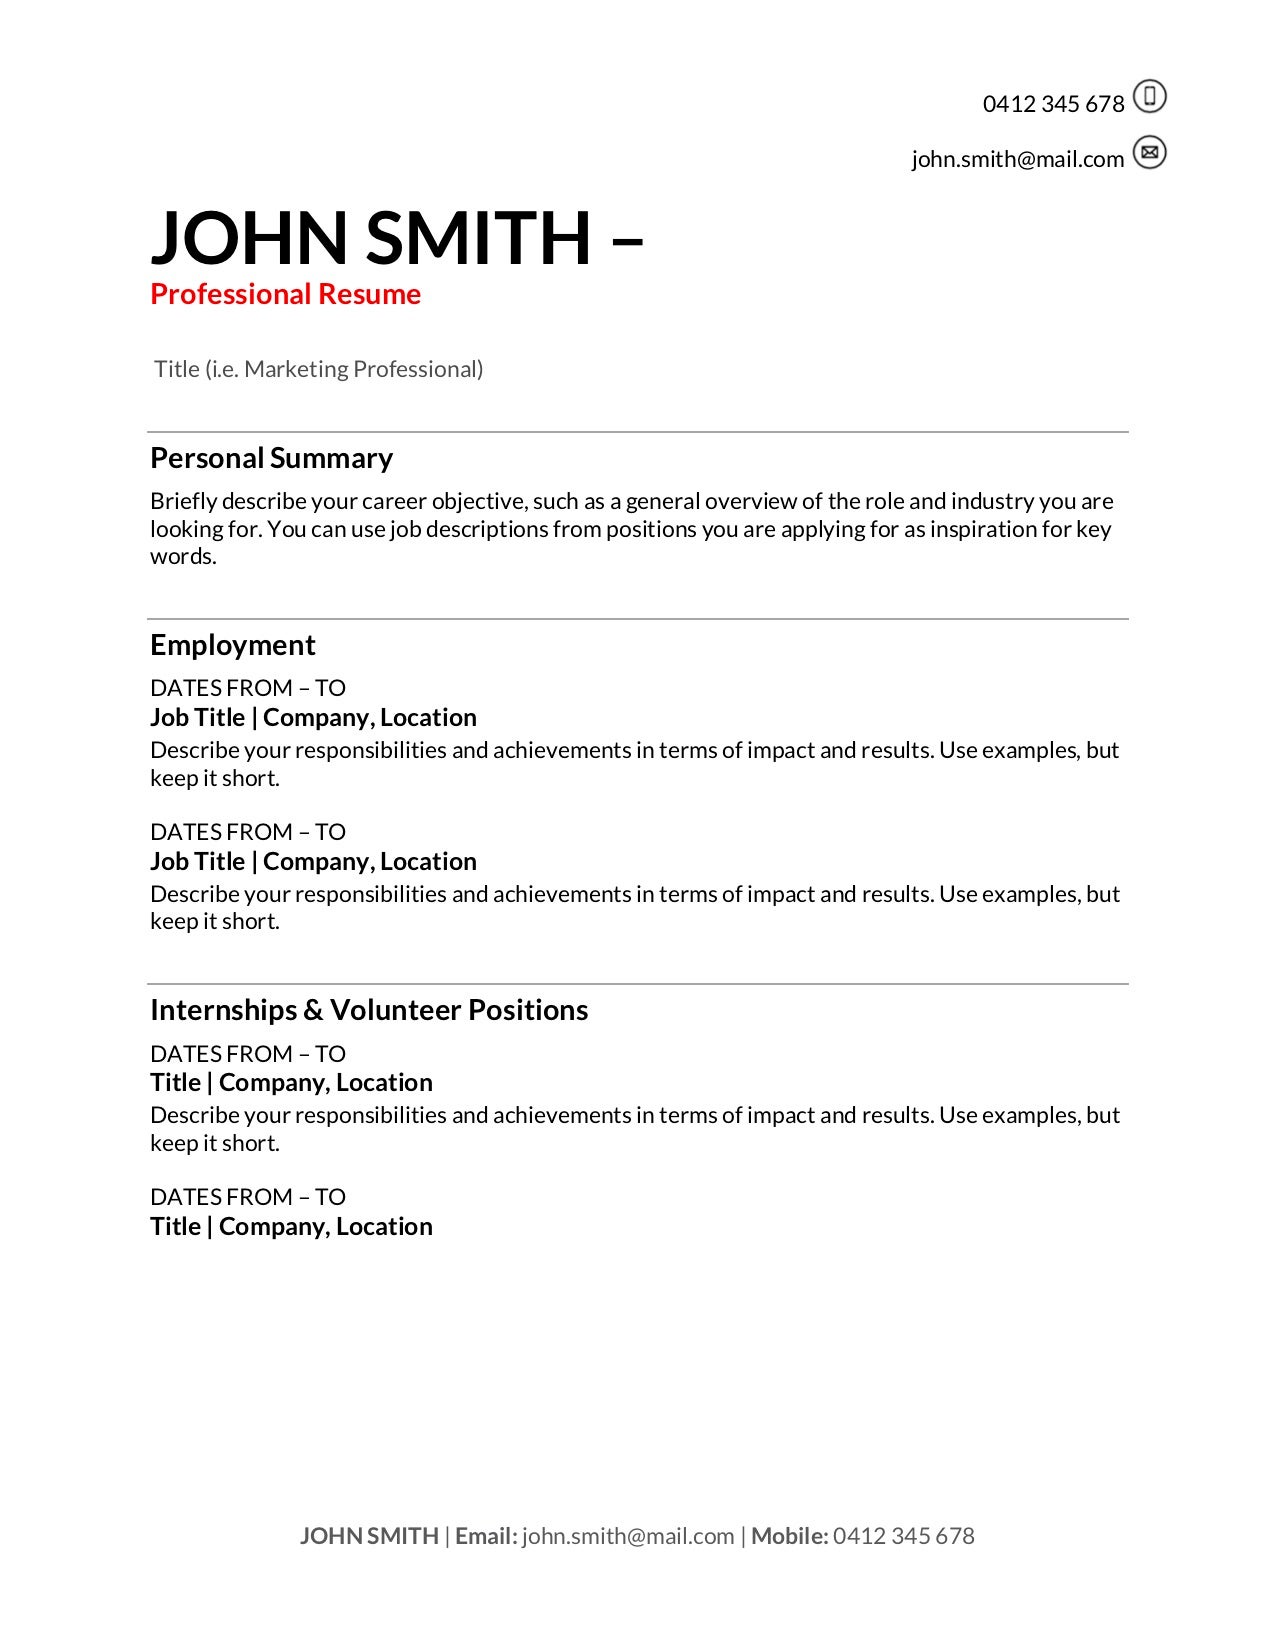 resume Without Driving Yourself Crazy